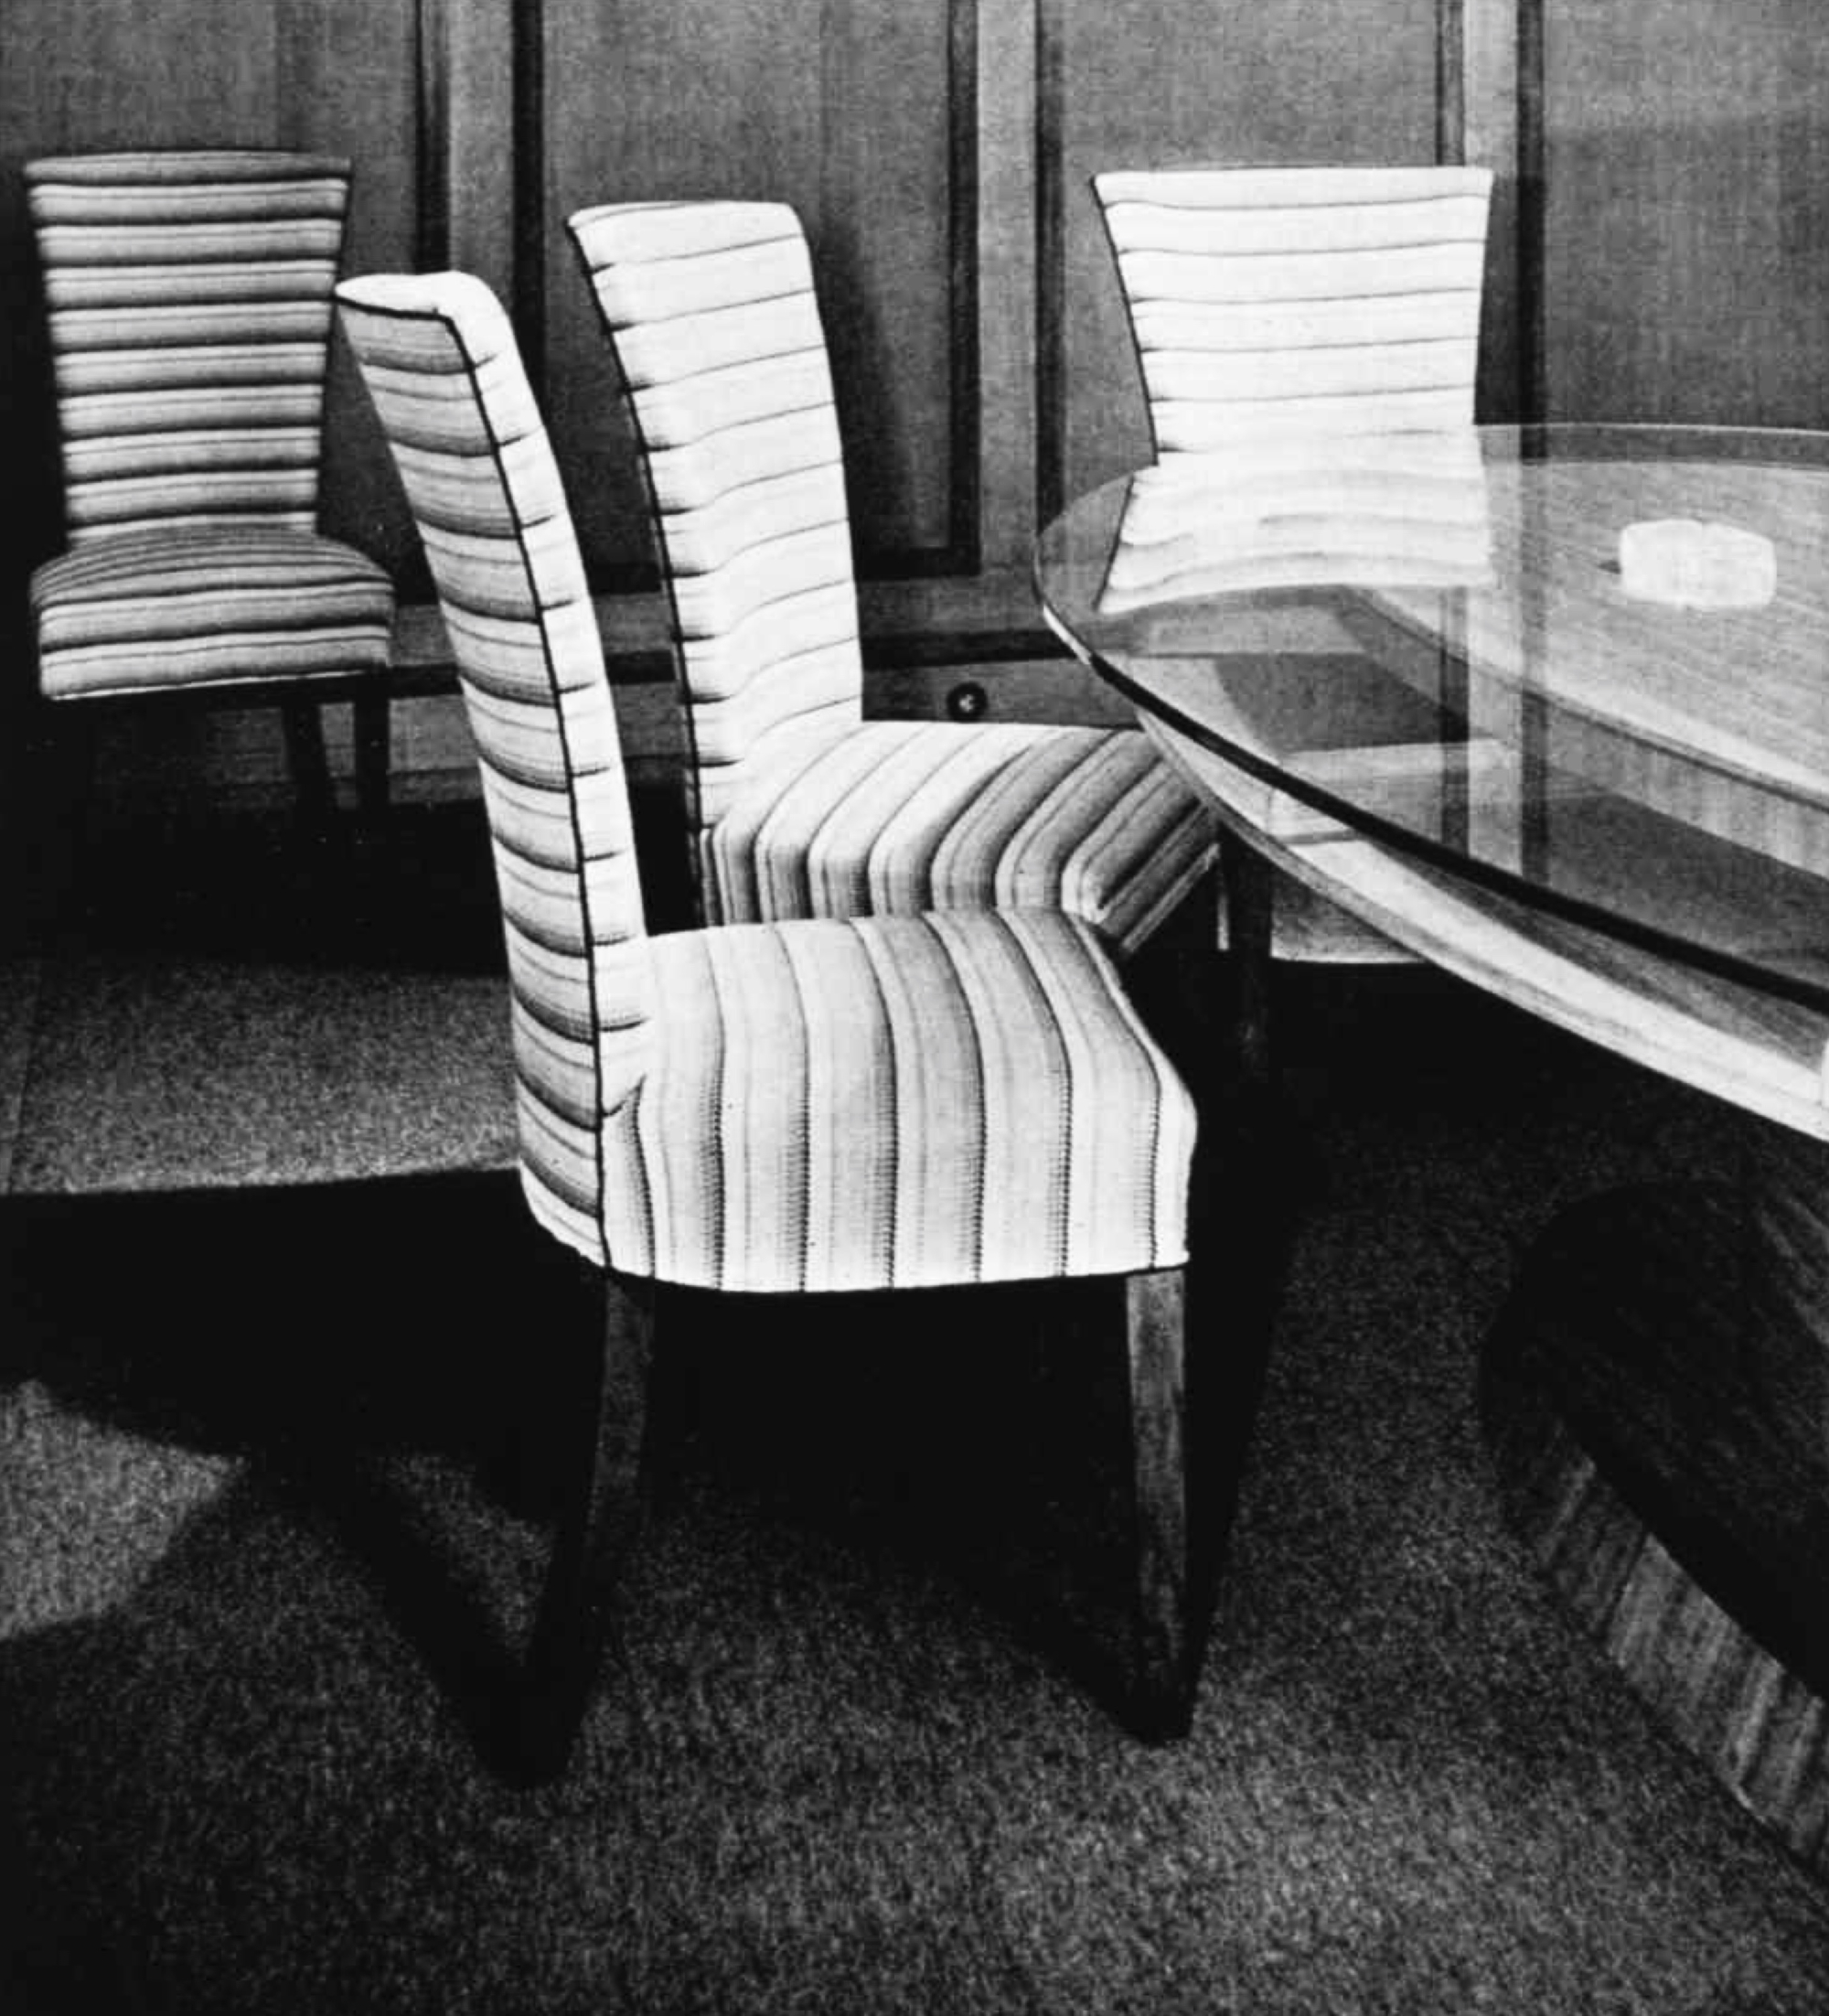 Armless upholstered chairs around a glass-topped table